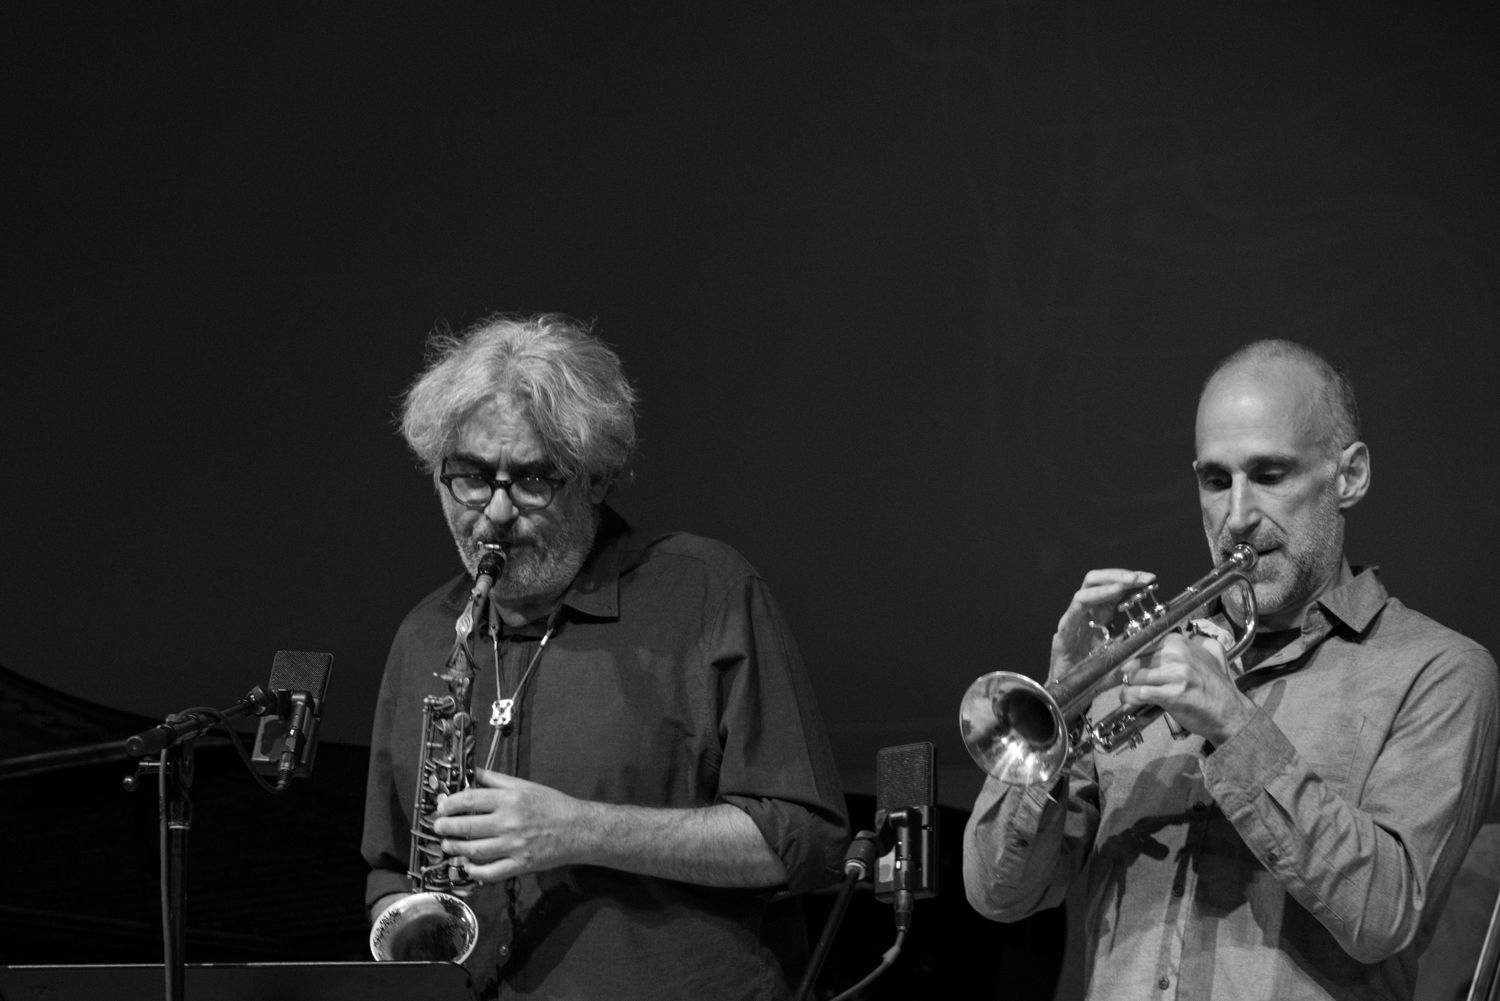 Tim Berne (saxophone) and Ralph Alessi (trumpet) performing at New School Tishman Auditorium - ECM Records Stage, January 16.